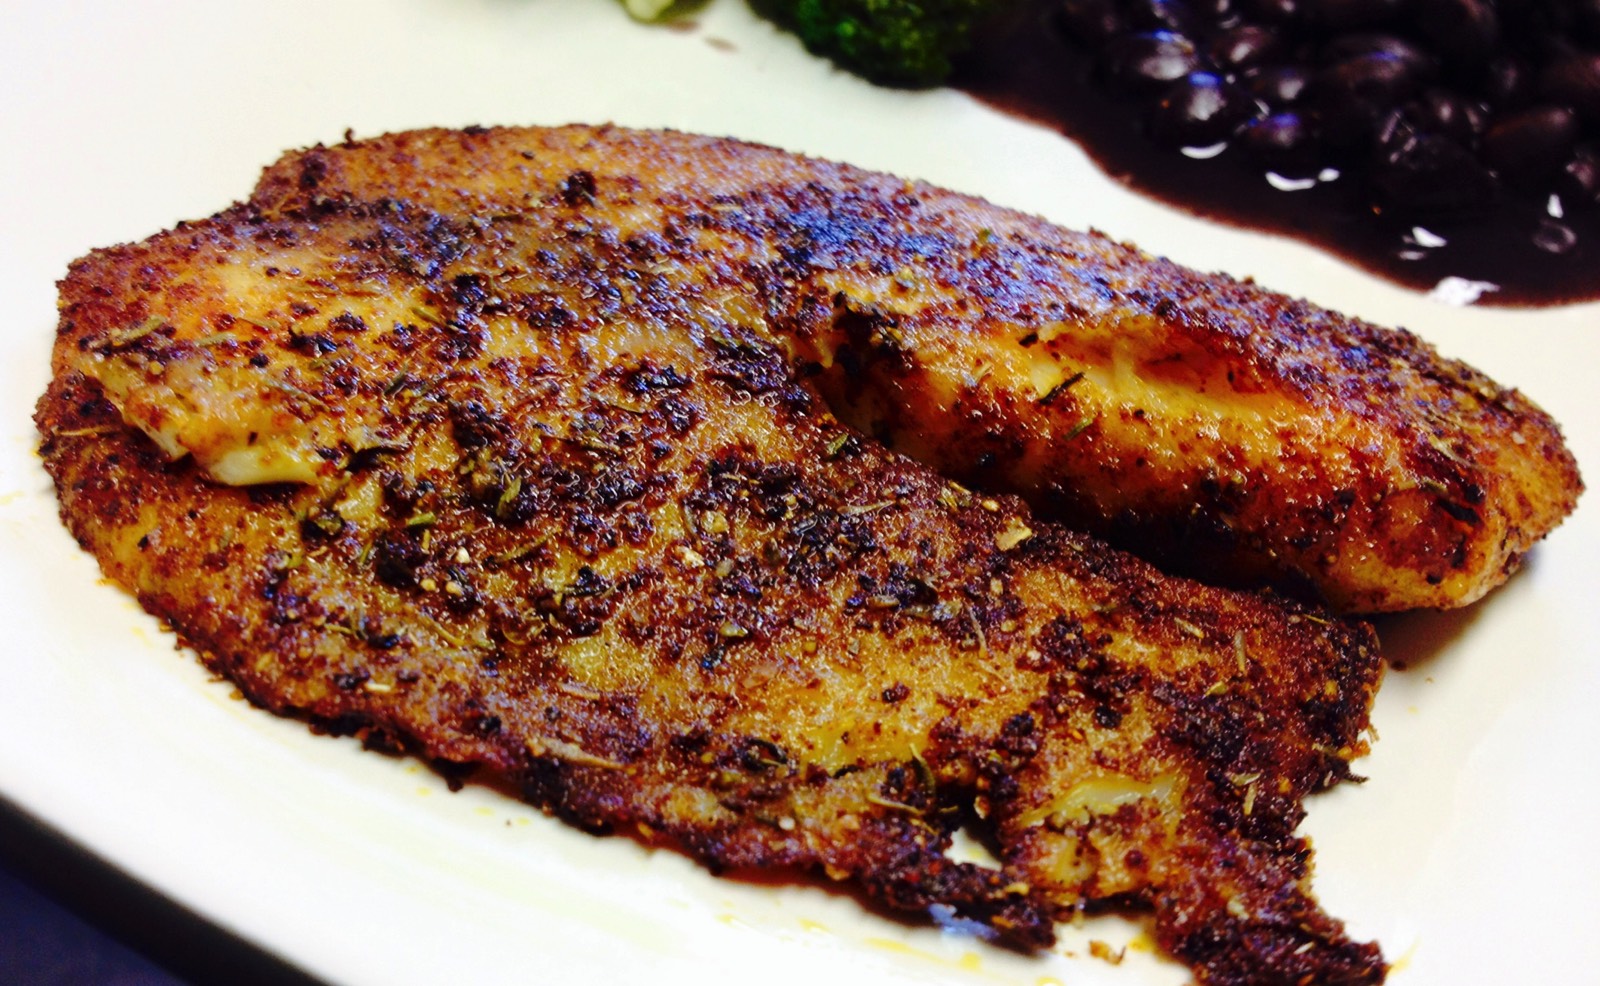 Simple and light tilapia recipe made by blackening the tilapia fillets